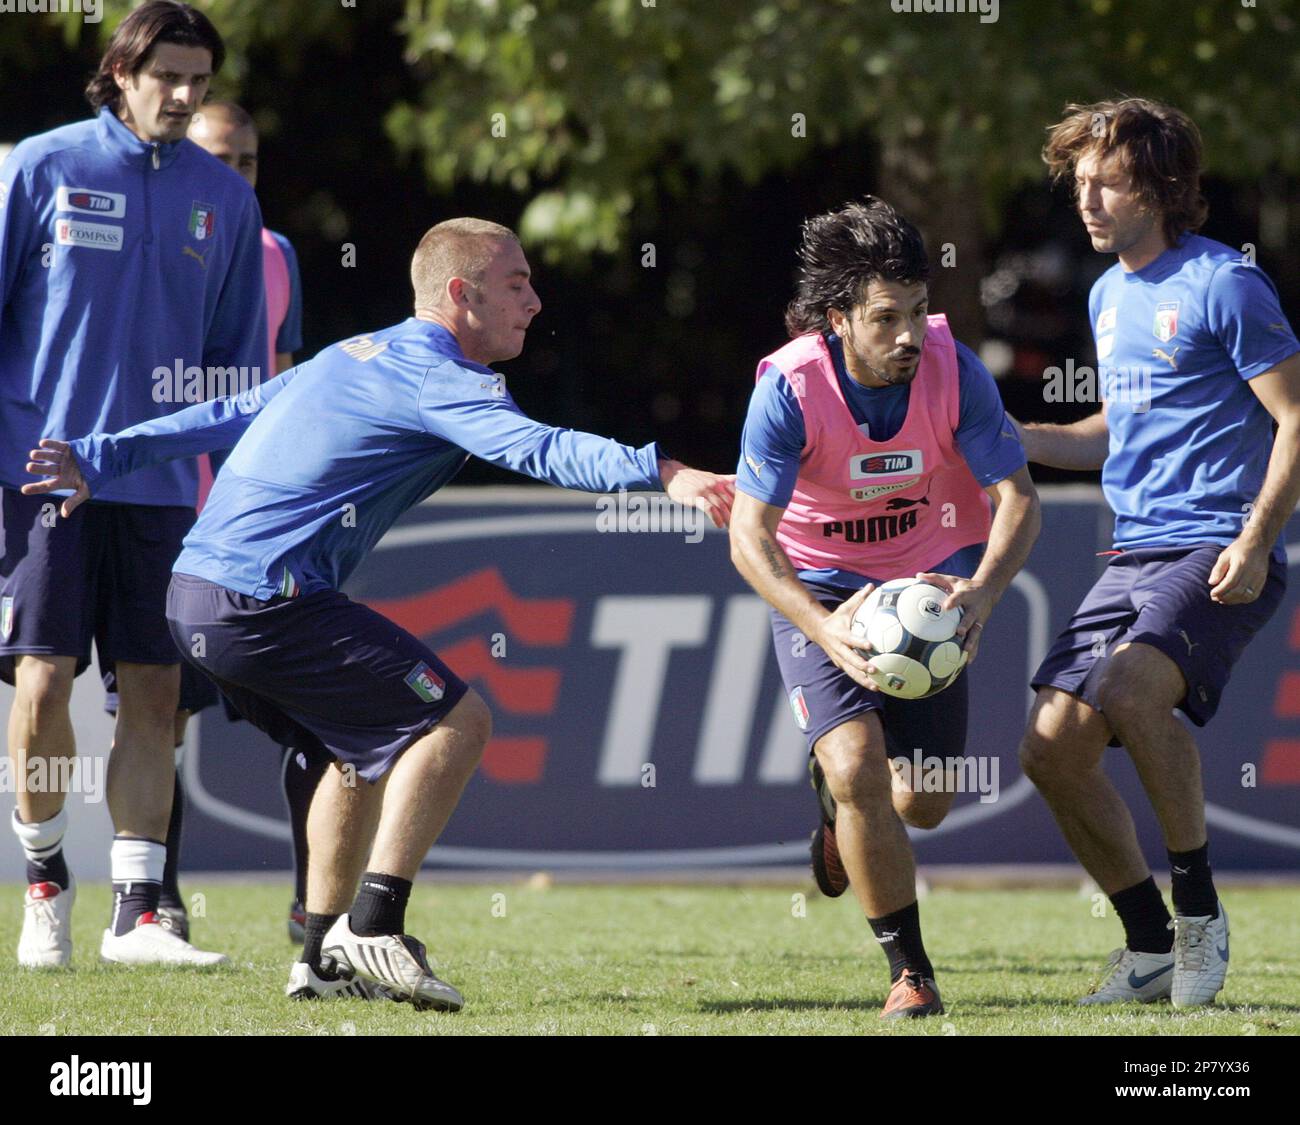 From left in background, Italy soccer team's Vincenzo Iaquinta, Daniele De Gennaro Gattuso with the ball, and Andrea Pirlo, perform a drill, during a practice session at the Coverciano training